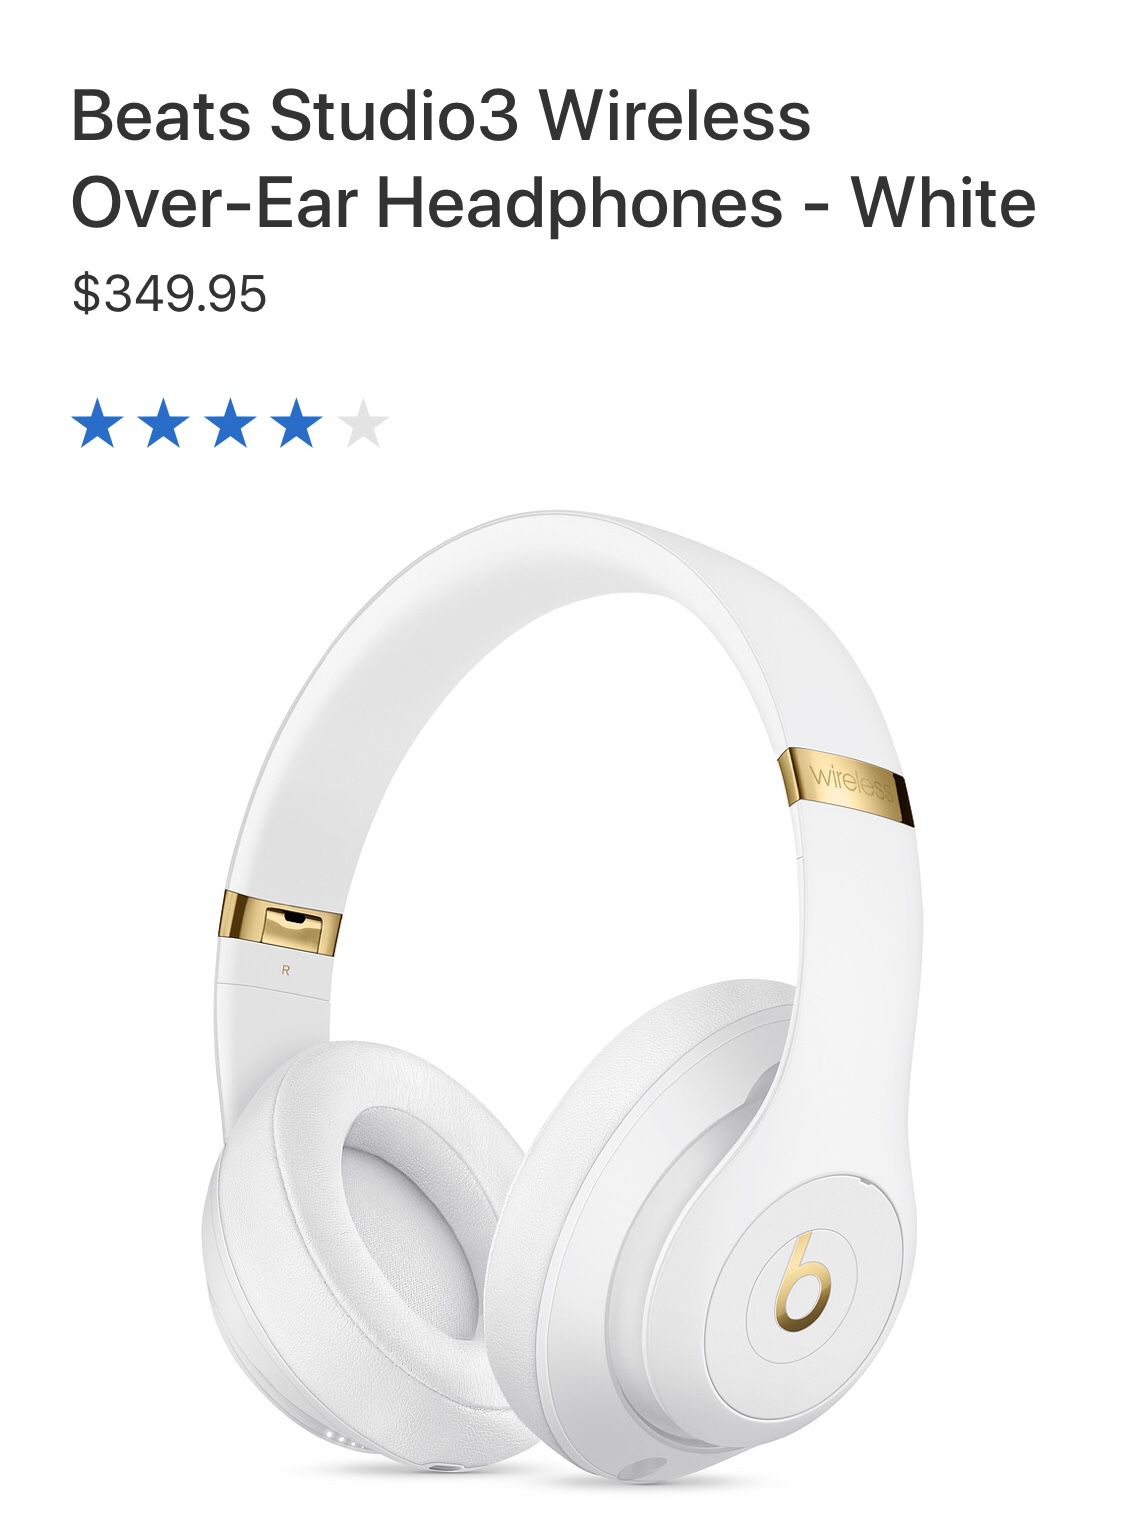 Beats Studio 3 Wireless over ear headphones White Brand New Sealed Lates Generation juste released better price than buying them at the store.... hur